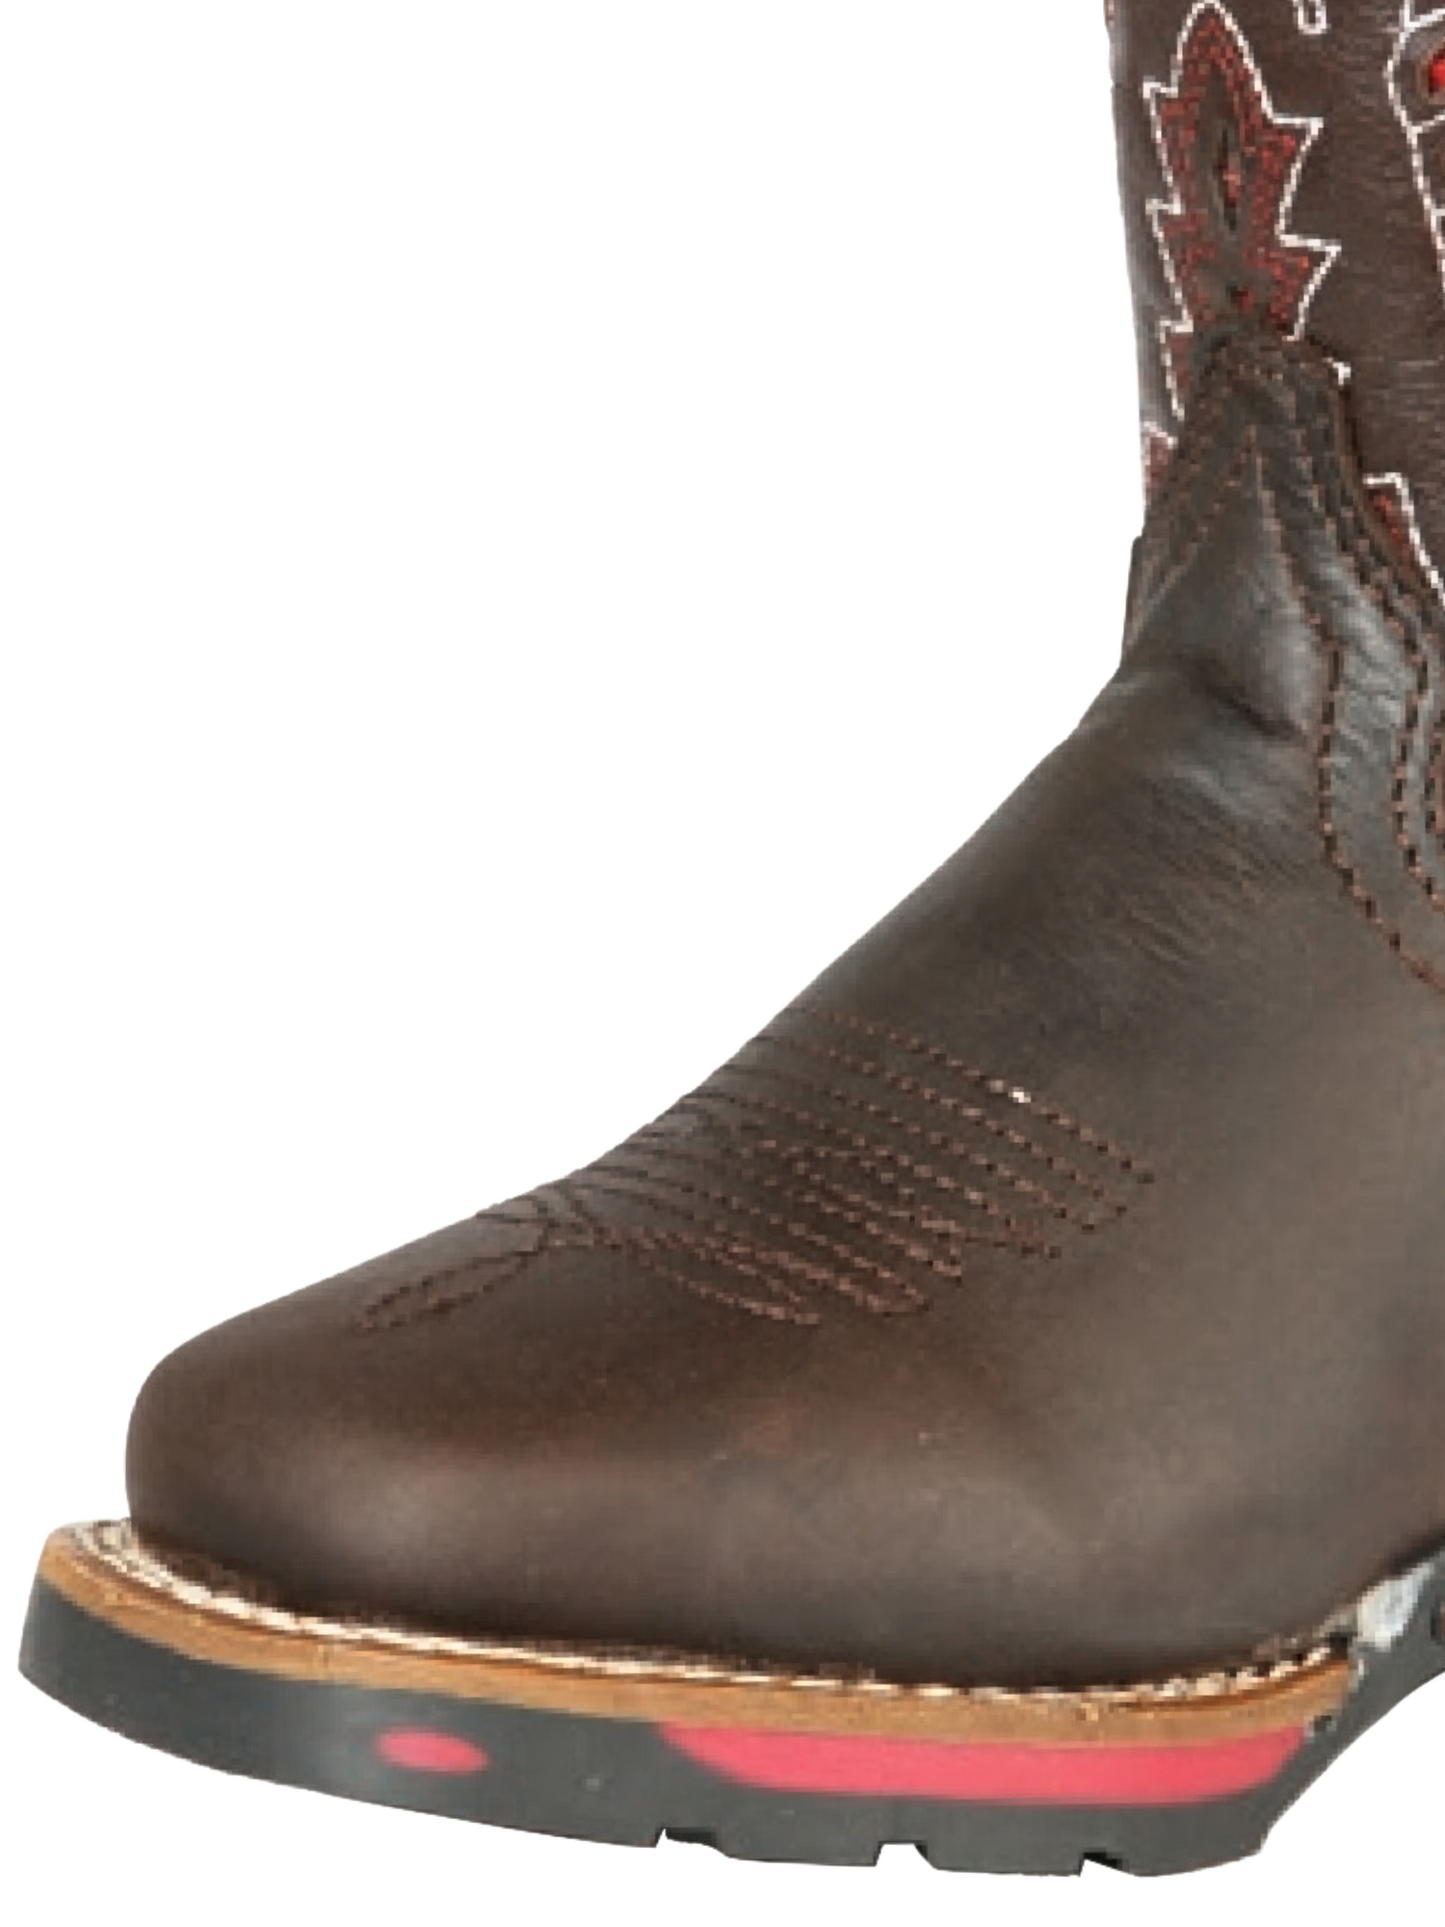 Kids - Classic Genuine Leather Rodeo Cowboy Boots for Boys 'Buffalo' - ID: 126588